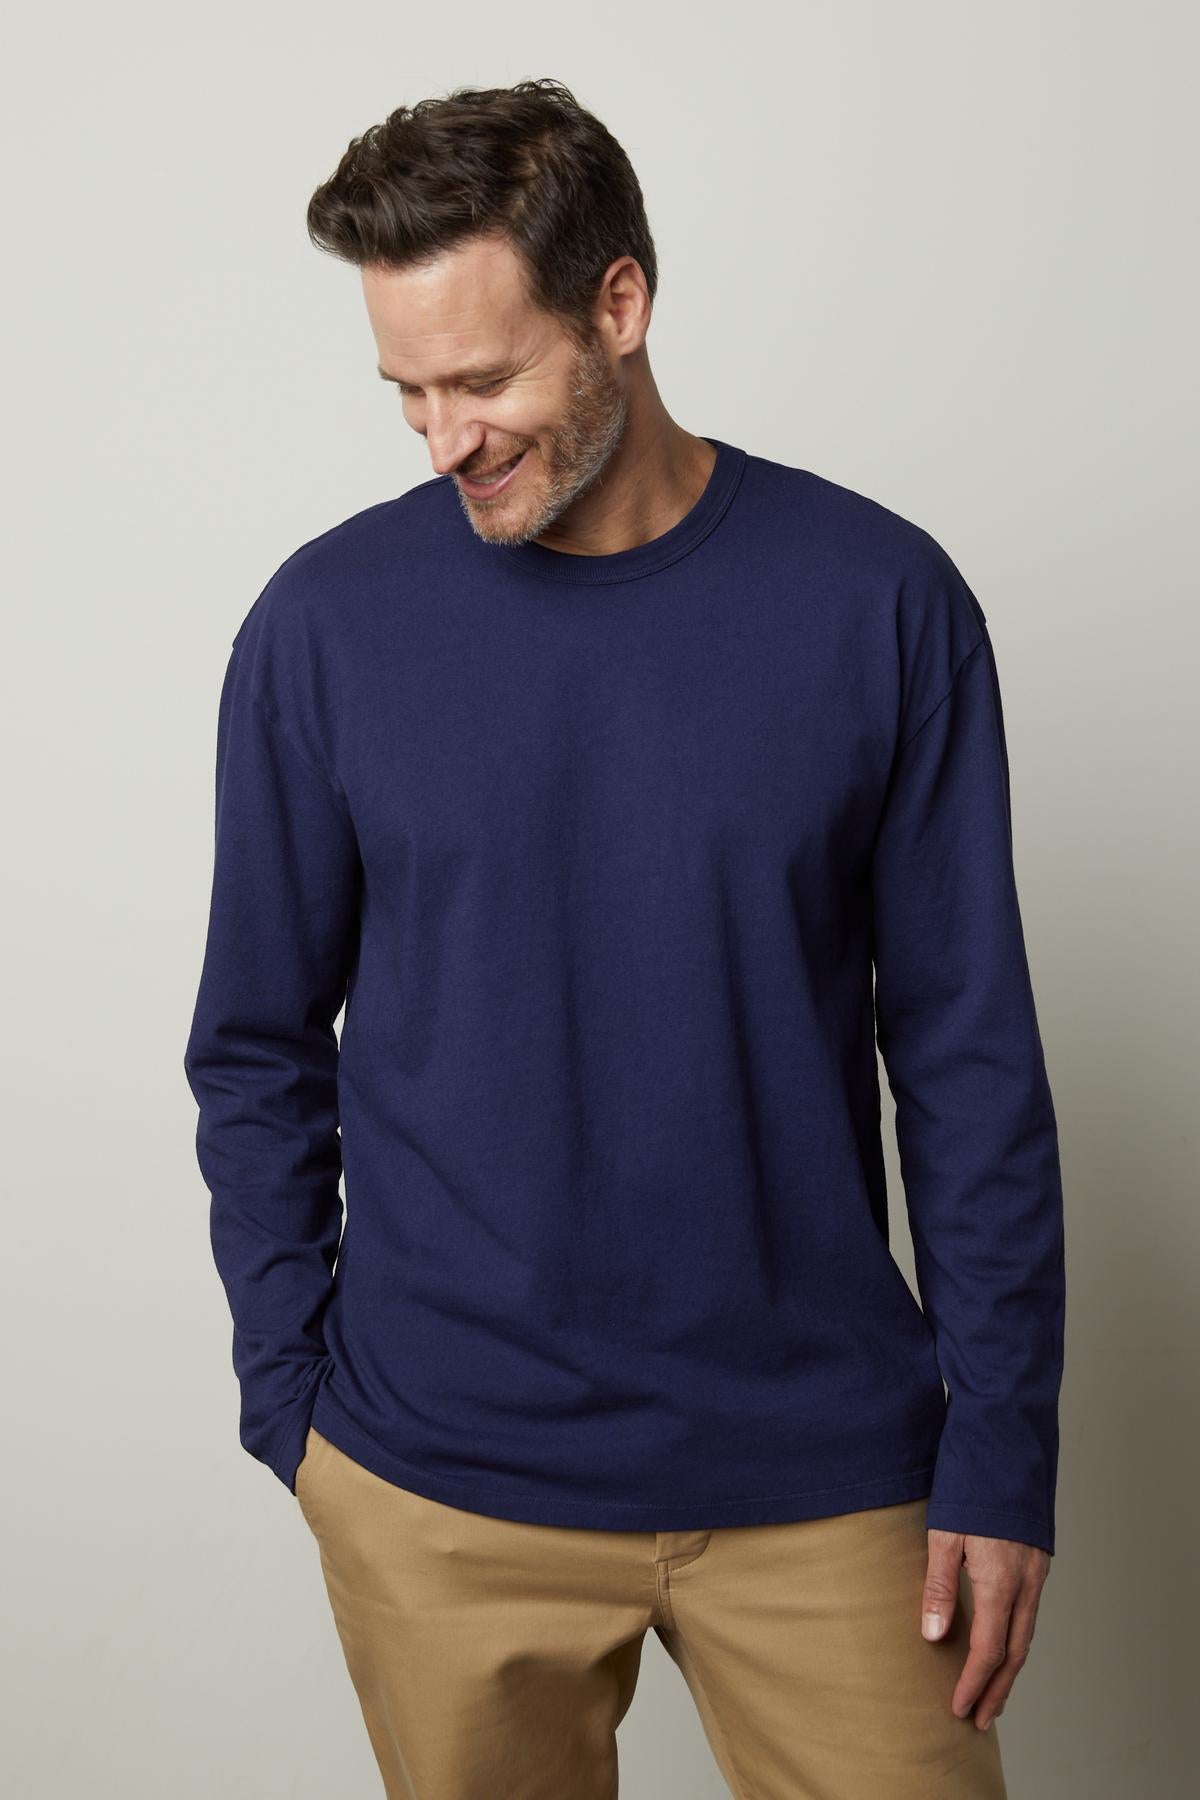 A man wearing a Velvet by Graham & Spencer EDWARD CREW NECK TEE in blue and khaki pants.-35472064807105